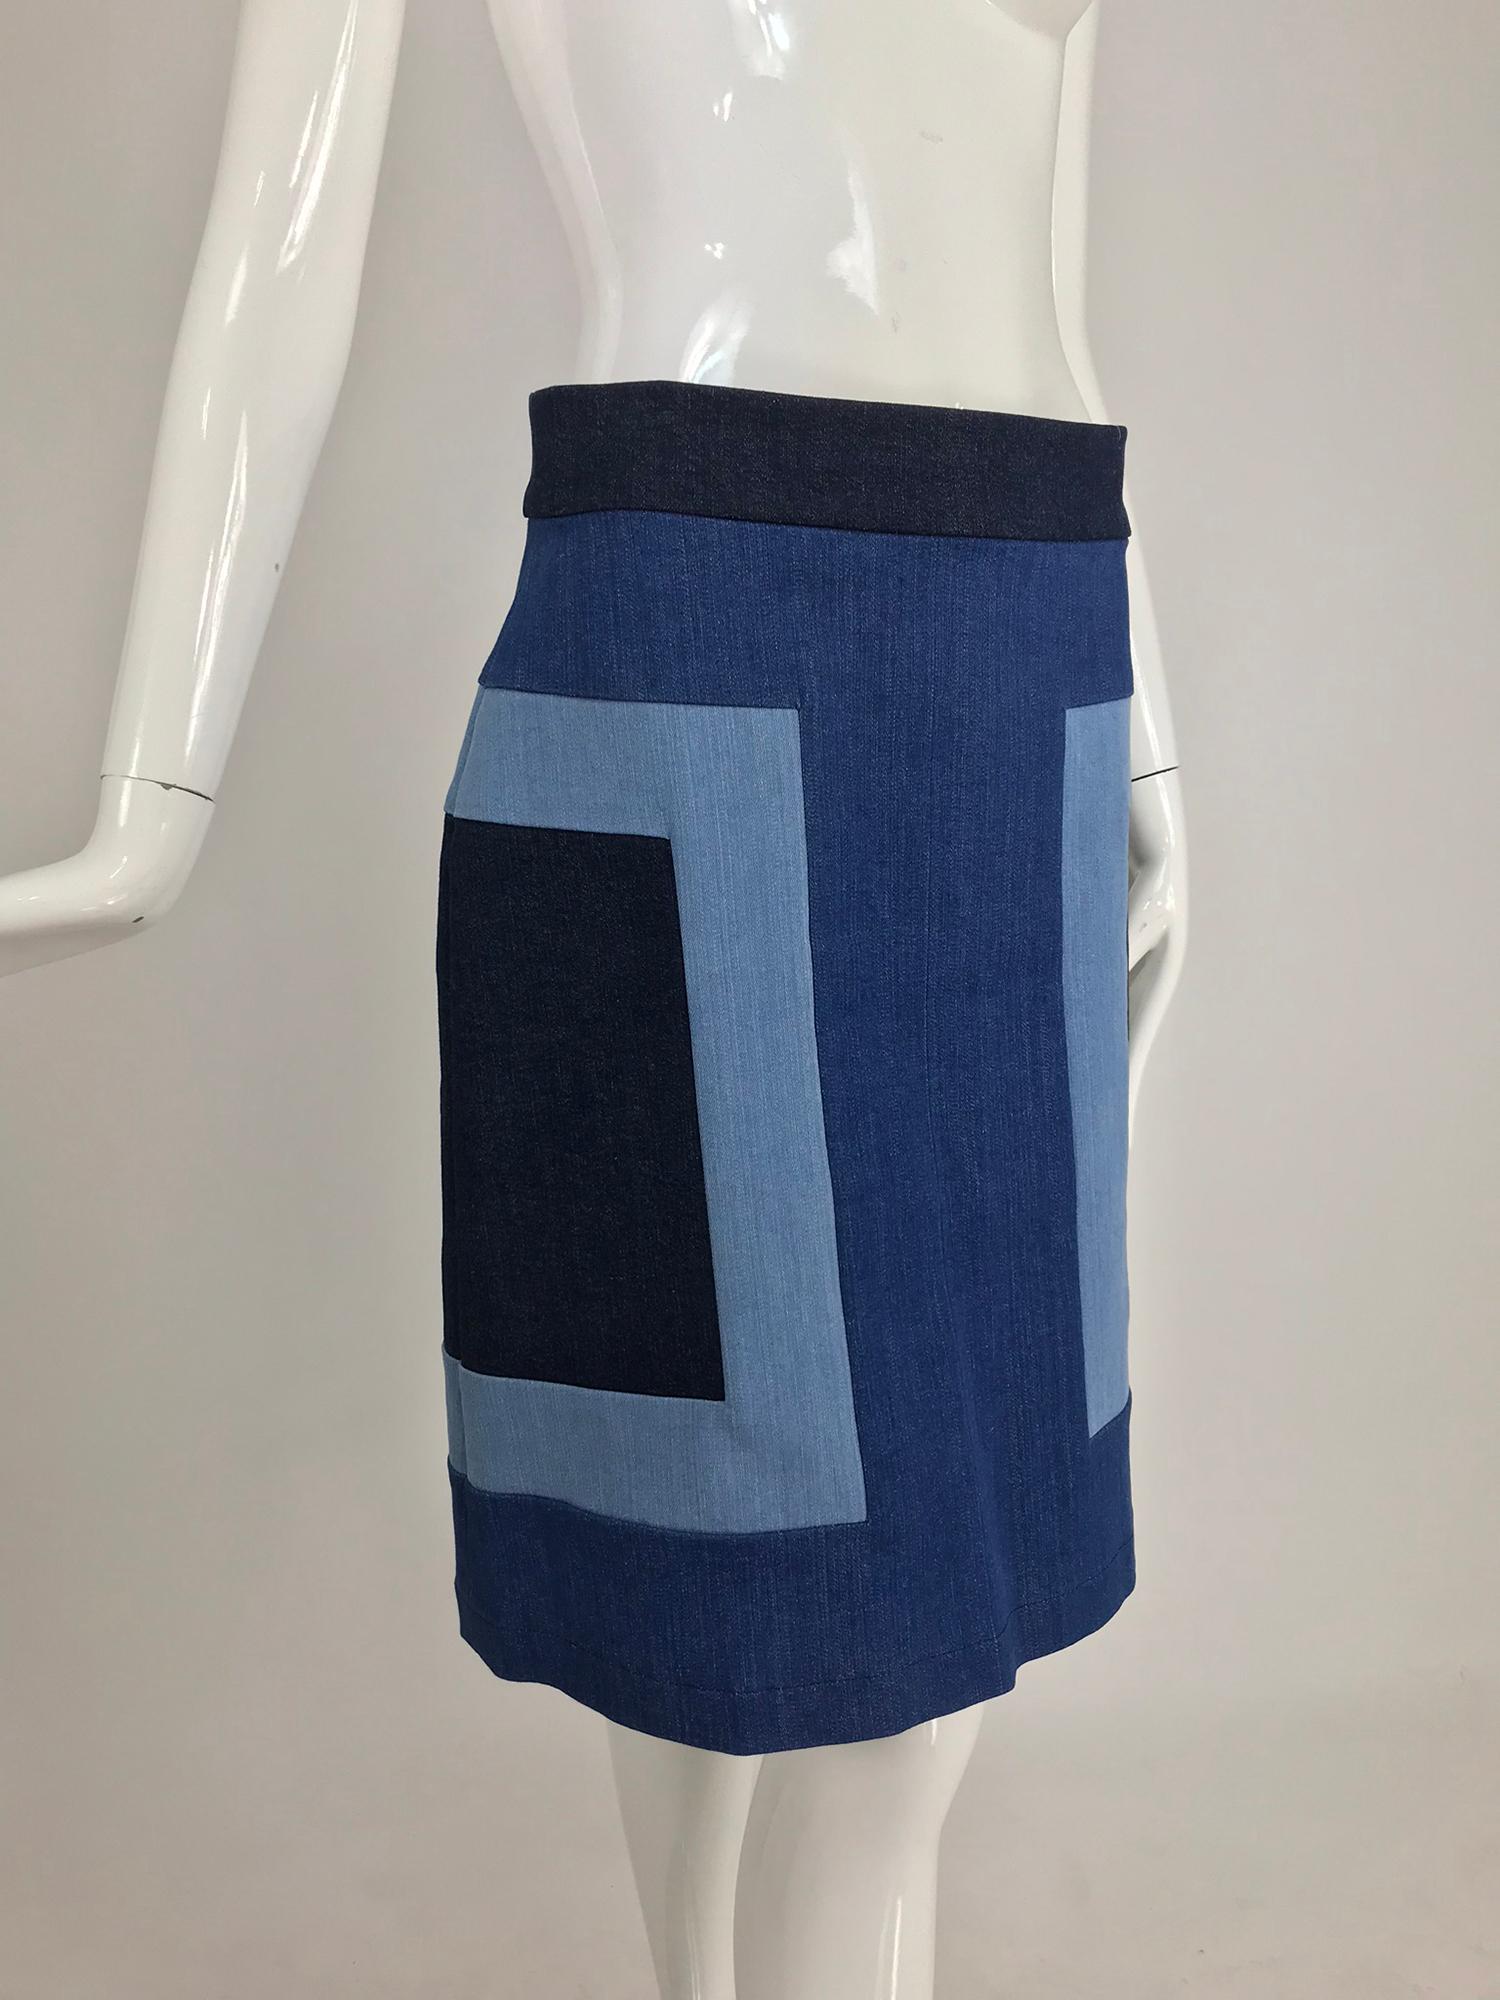 Escada Denim Colour Block Skirt. A line skirt with bold blocks of various washes of denim that are stitched together to form the design, the skirt closes at the back with a heavy silver zipper and logo pull tab. Unlined. Marked size 36.
In excellent